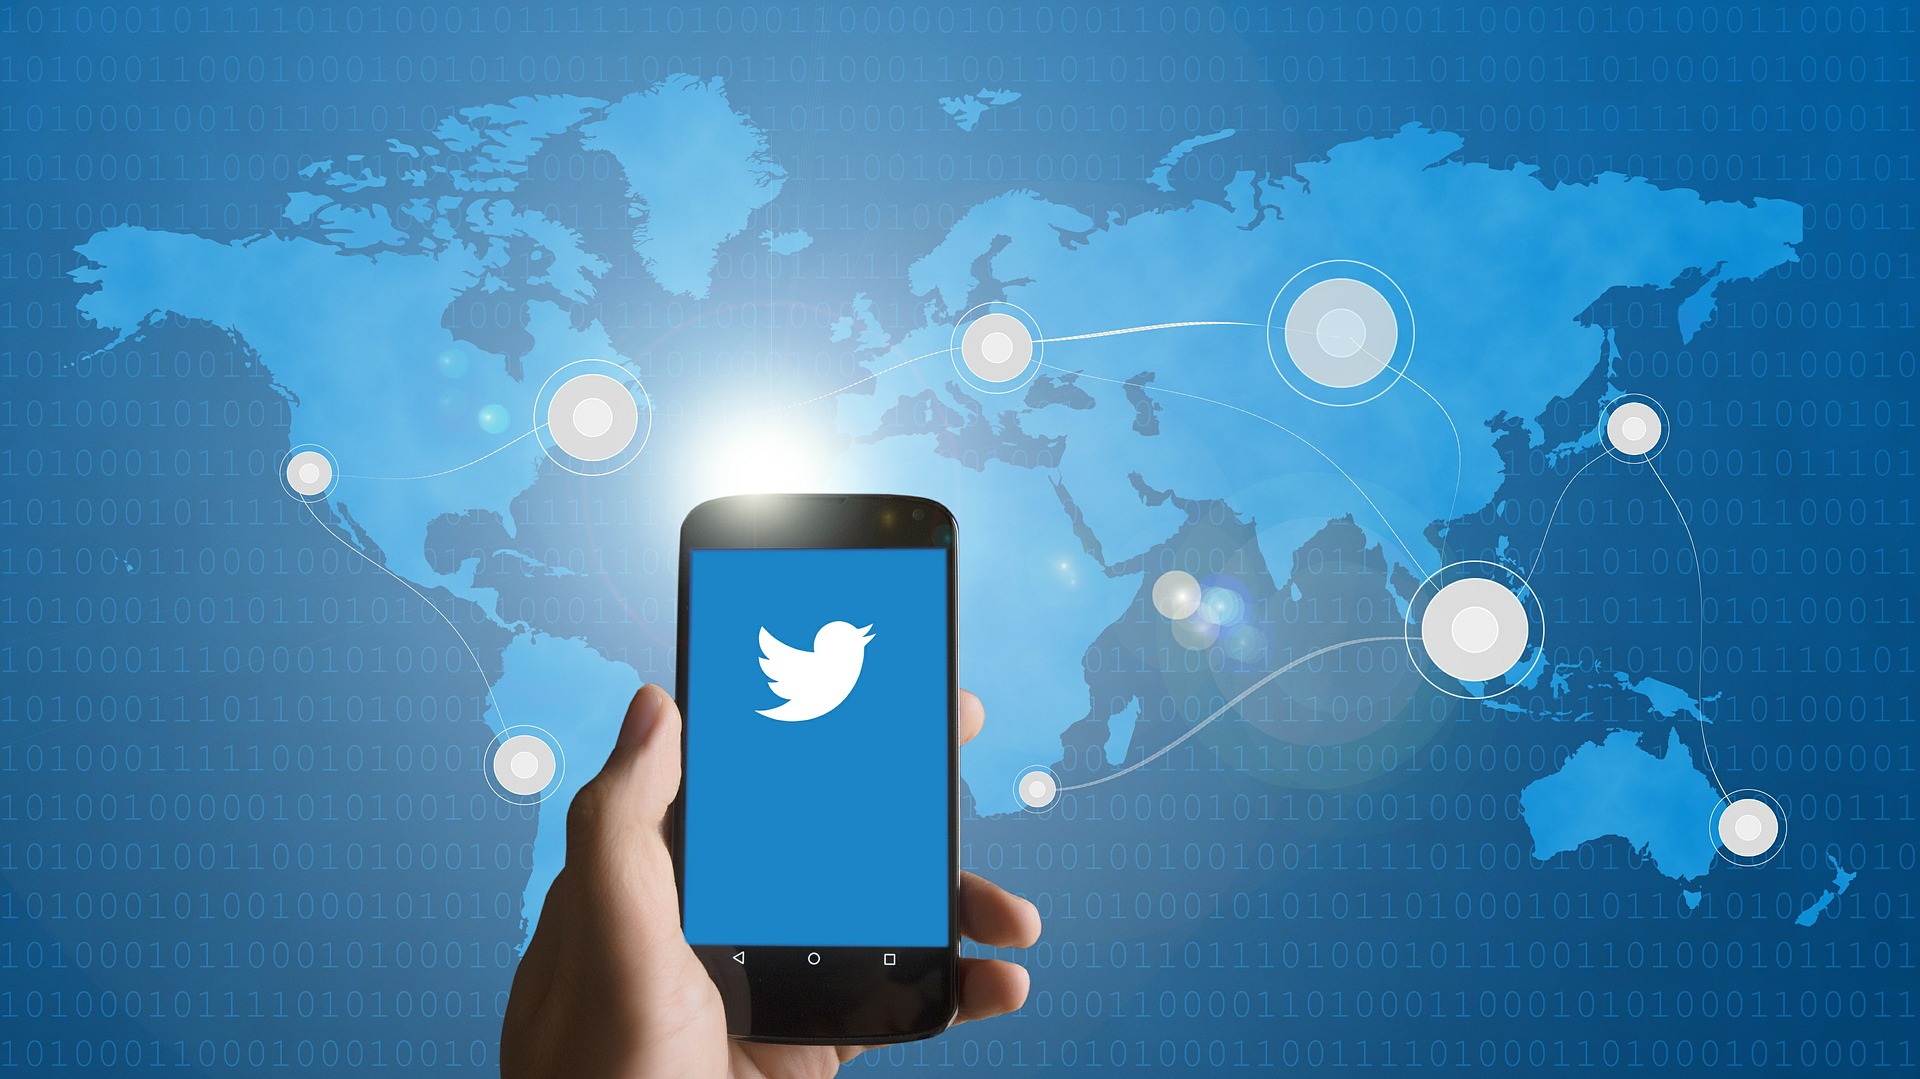 What the “new” Twitter means for businesses